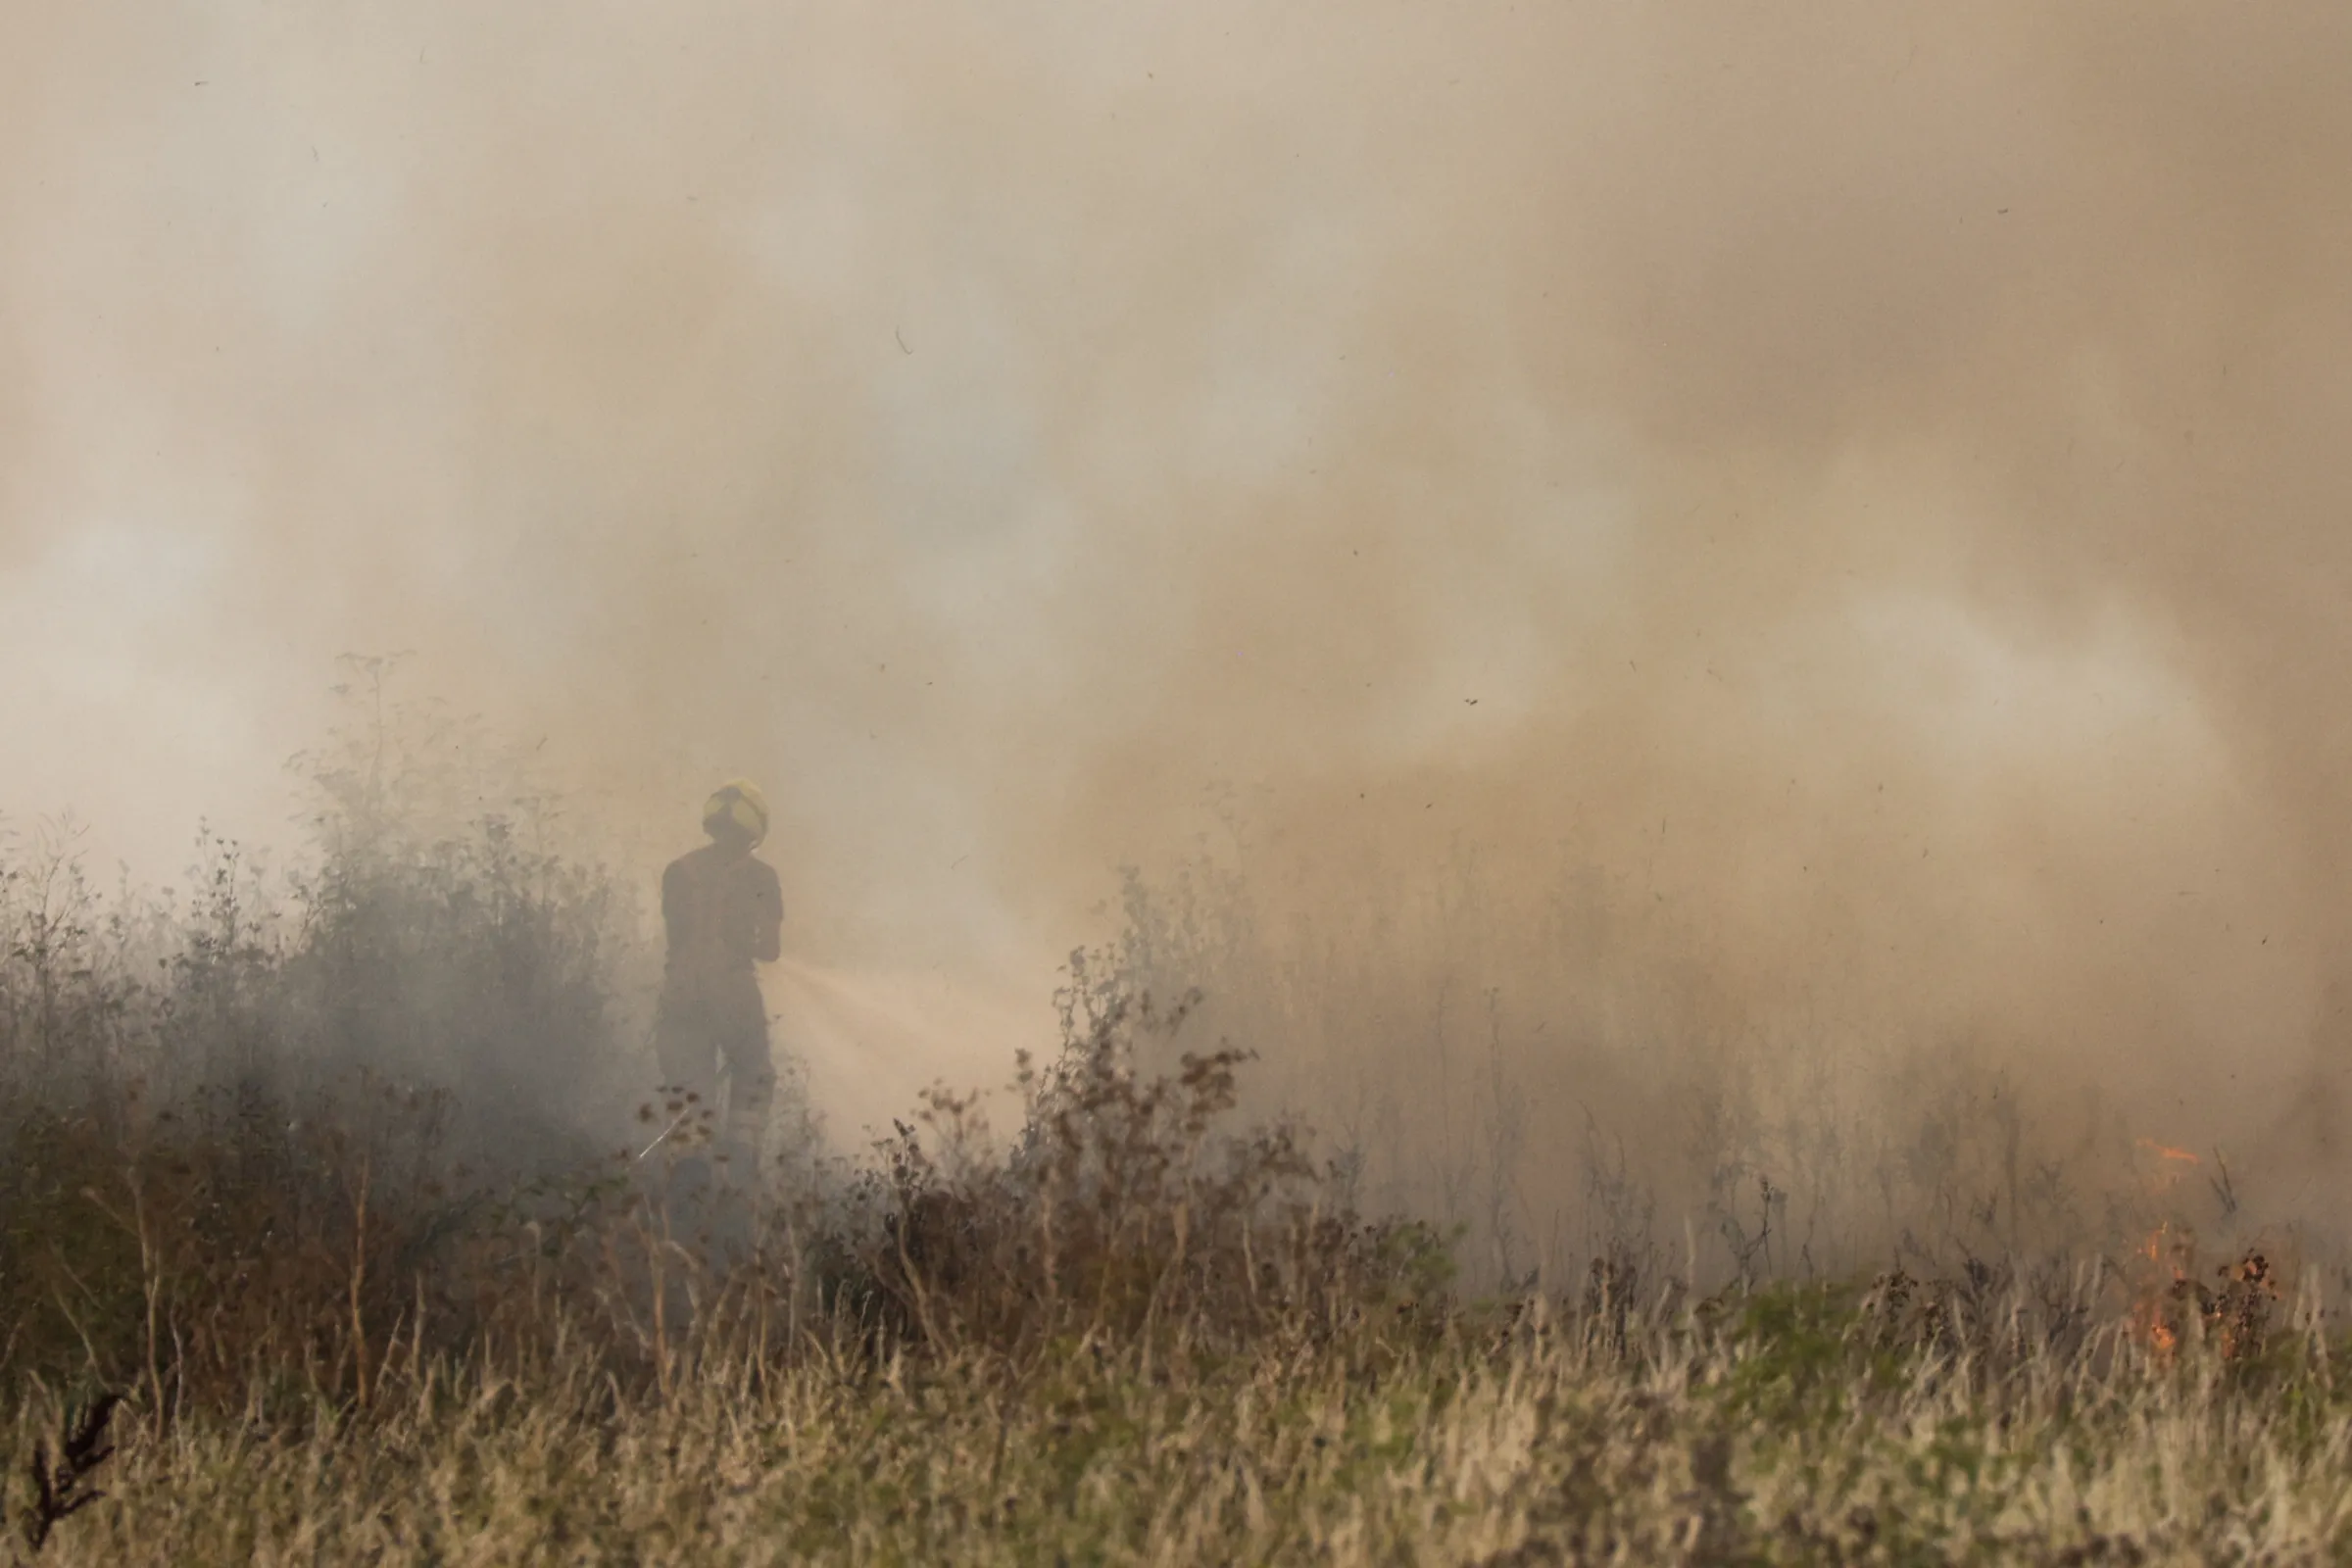 A firefighter works to contain a grass fire during a heatwave in Snodland, near Maidstone, Britain, August 14, 2022. REUTERS/Kevin Coombs